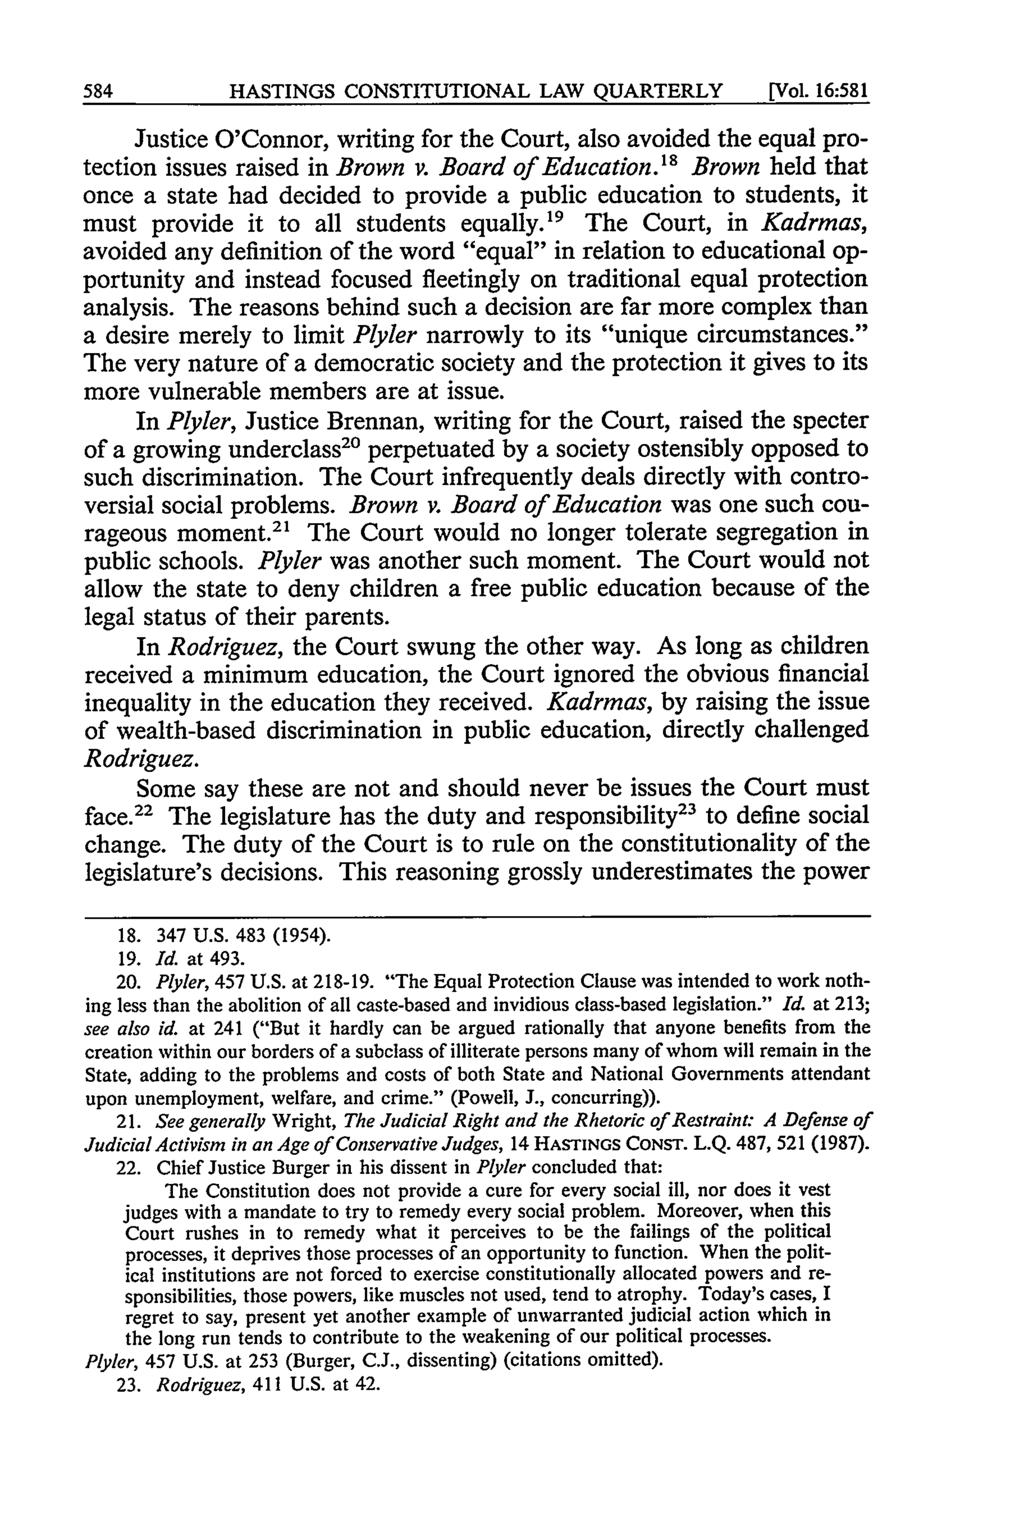 584 HASTINGS CONSTITUTIONAL LAW QUARTERLY [Vol. 16:581 Justice O'Connor, writing for the Court, also avoided the equal protection issues raised in Brown v. Board of Education.